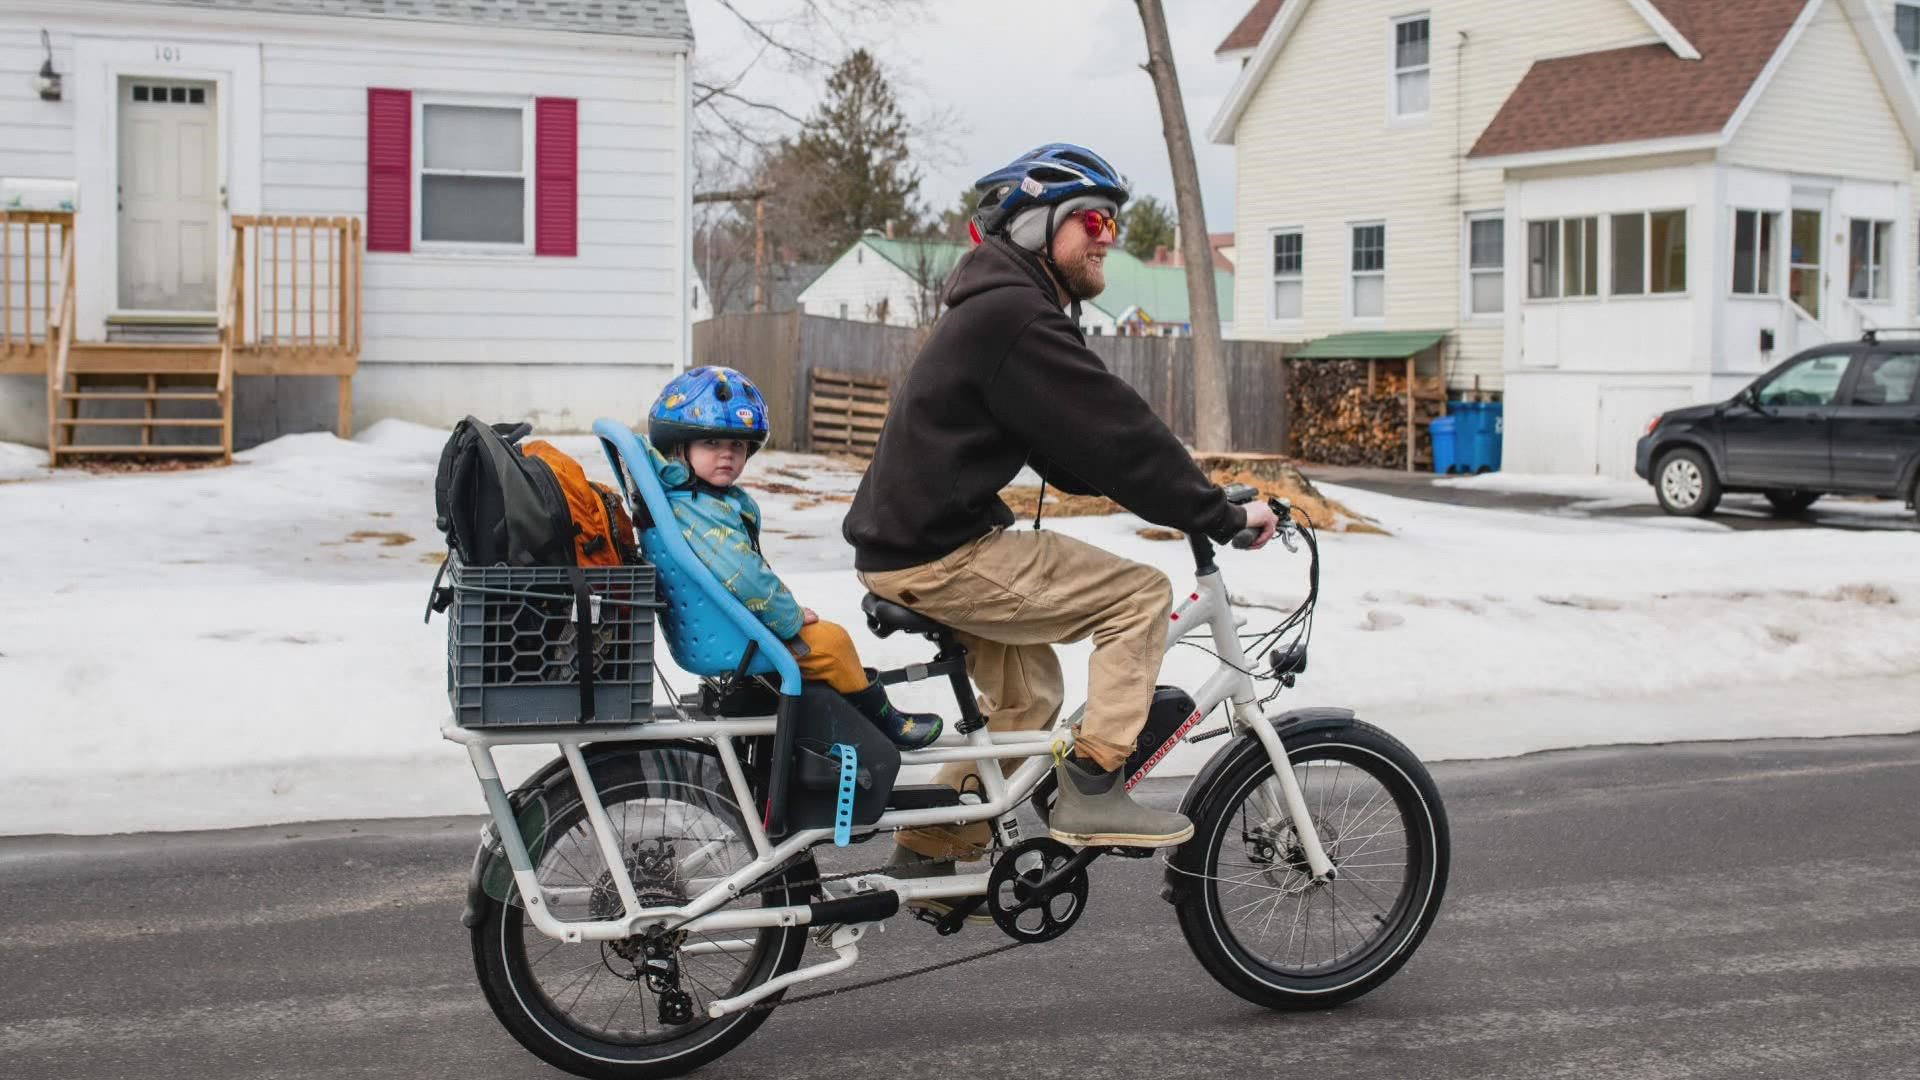 A potential gamechanger: Cargo bikes that can haul everything from furniture to surfboards